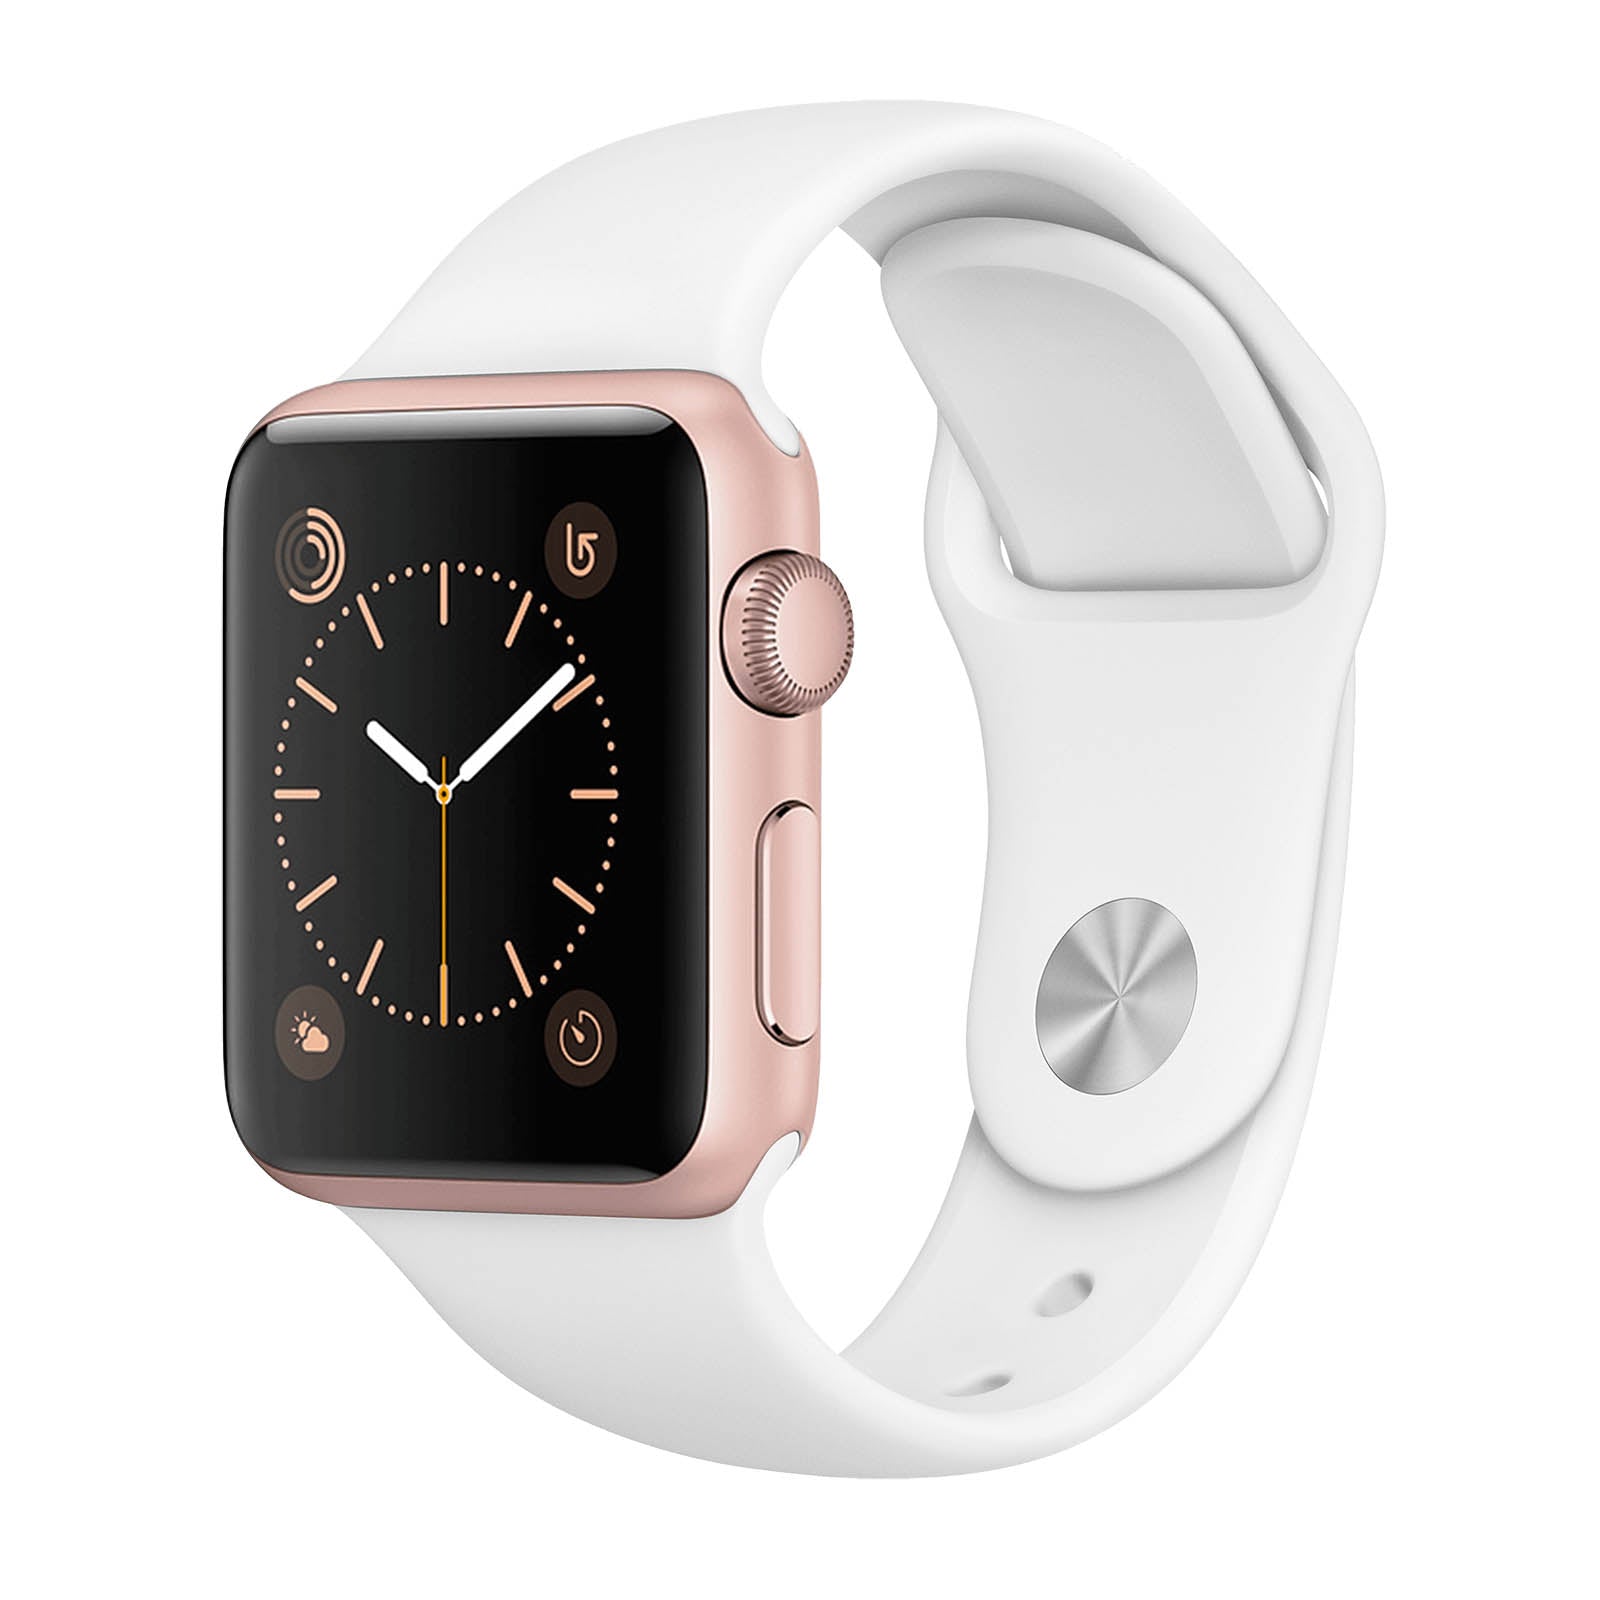 Apple Watch Series 2 Aluminium 38mm - Or Rose - Comme Neuf